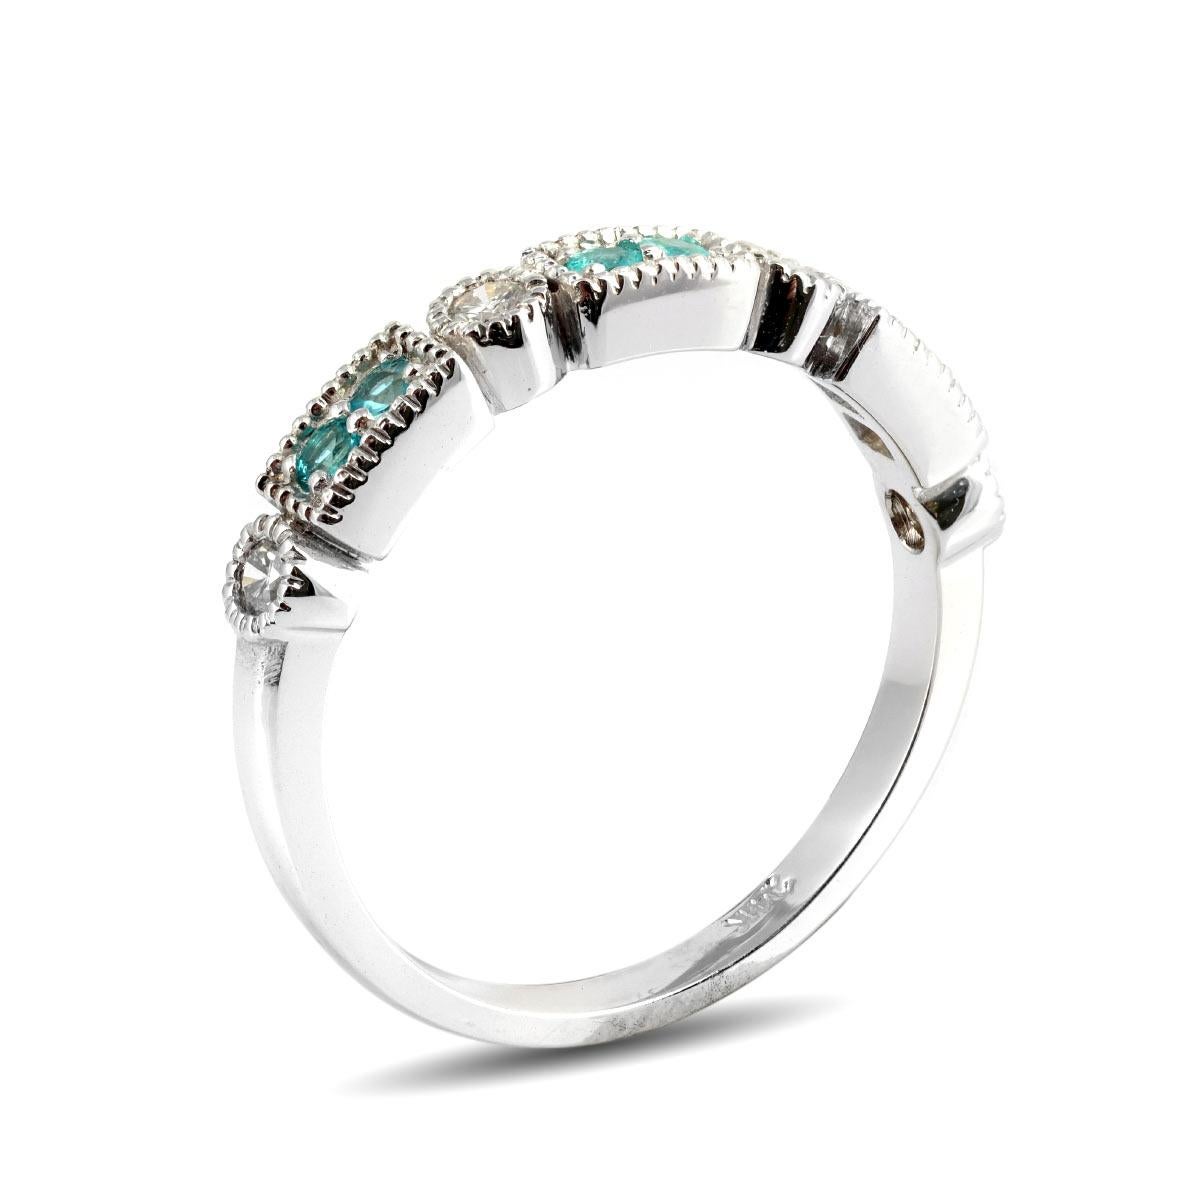 Small yet full of intense teals, here is a band that showcases 0.13 carats of Paraiba Tourmalines. Each gem set in 14K White Gold prongs, and paired with diamonds that add an illuminating light, this is a ring that comes alive thanks to its vibrant